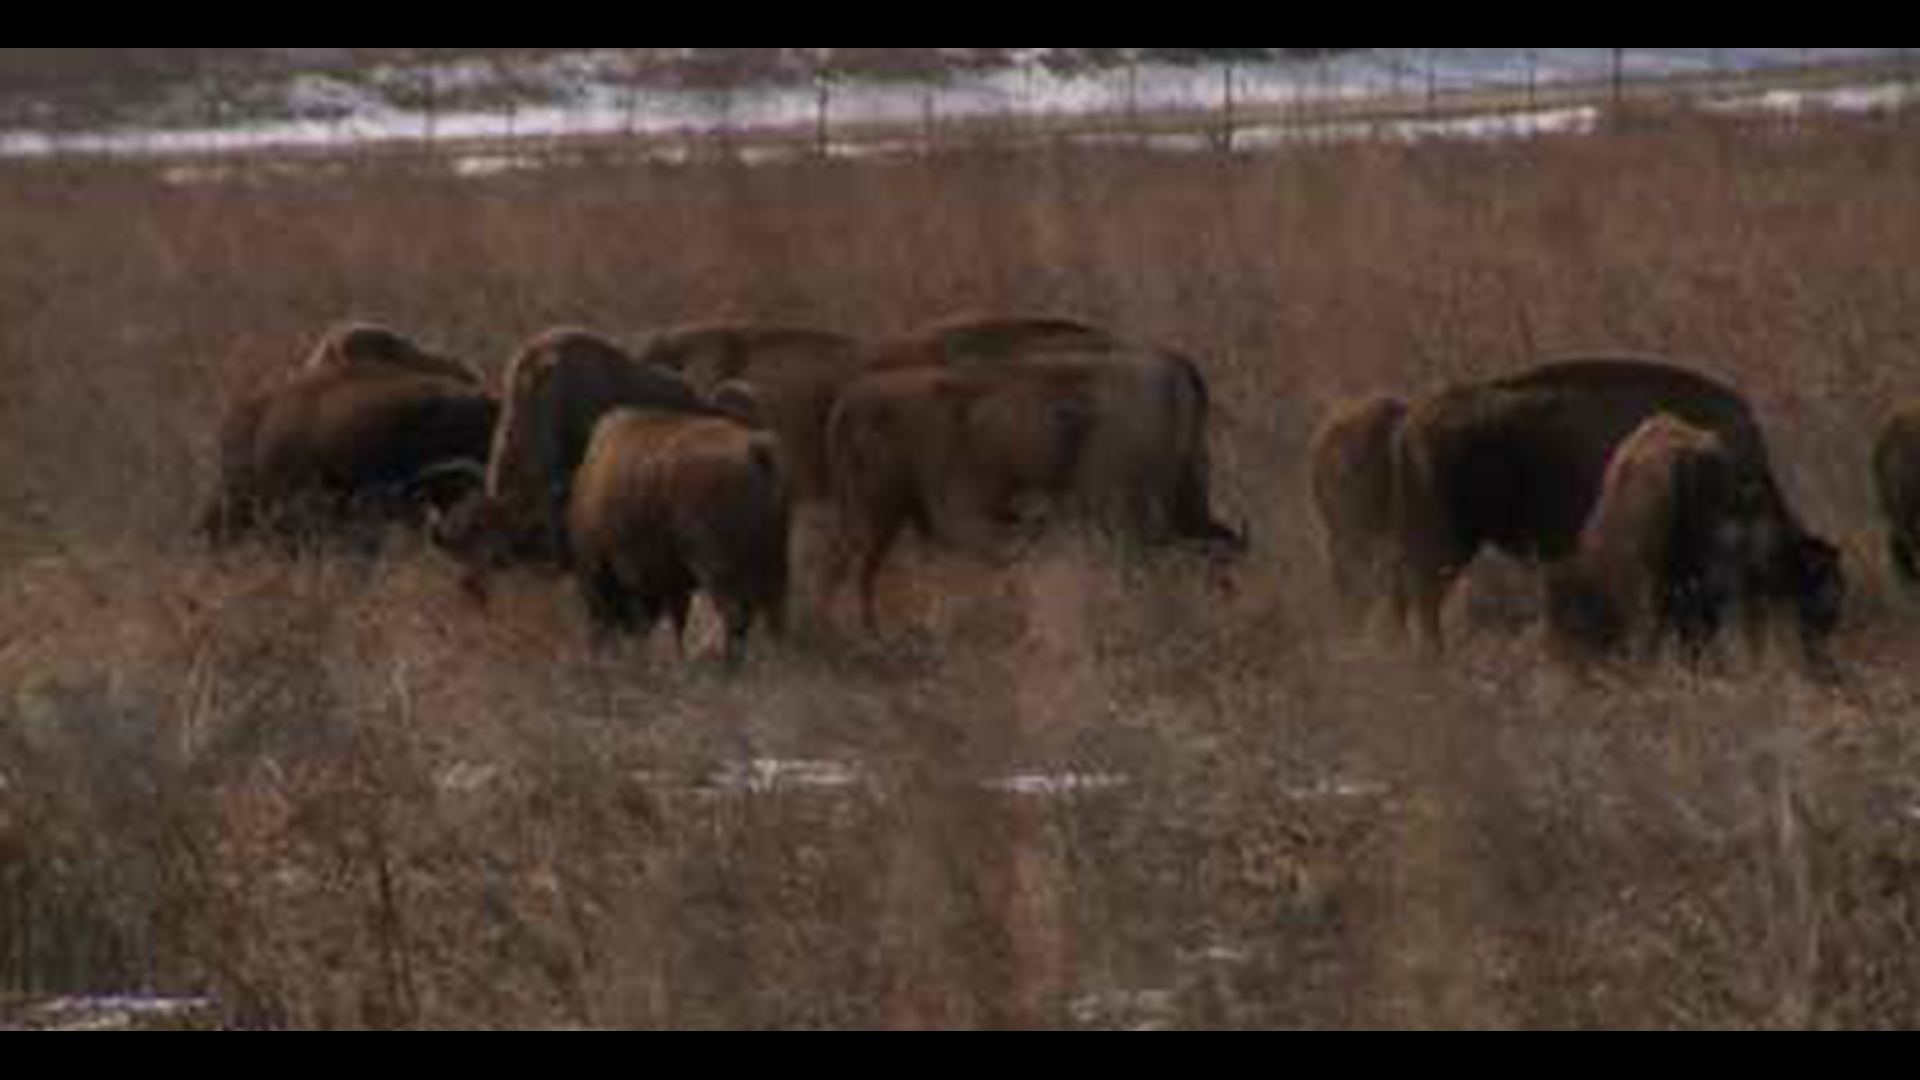 Since the bison were reintroduced to Nachusa Grasslands after being absent for nearly two centuries, the animals have multiplied. Now there's more than 100.